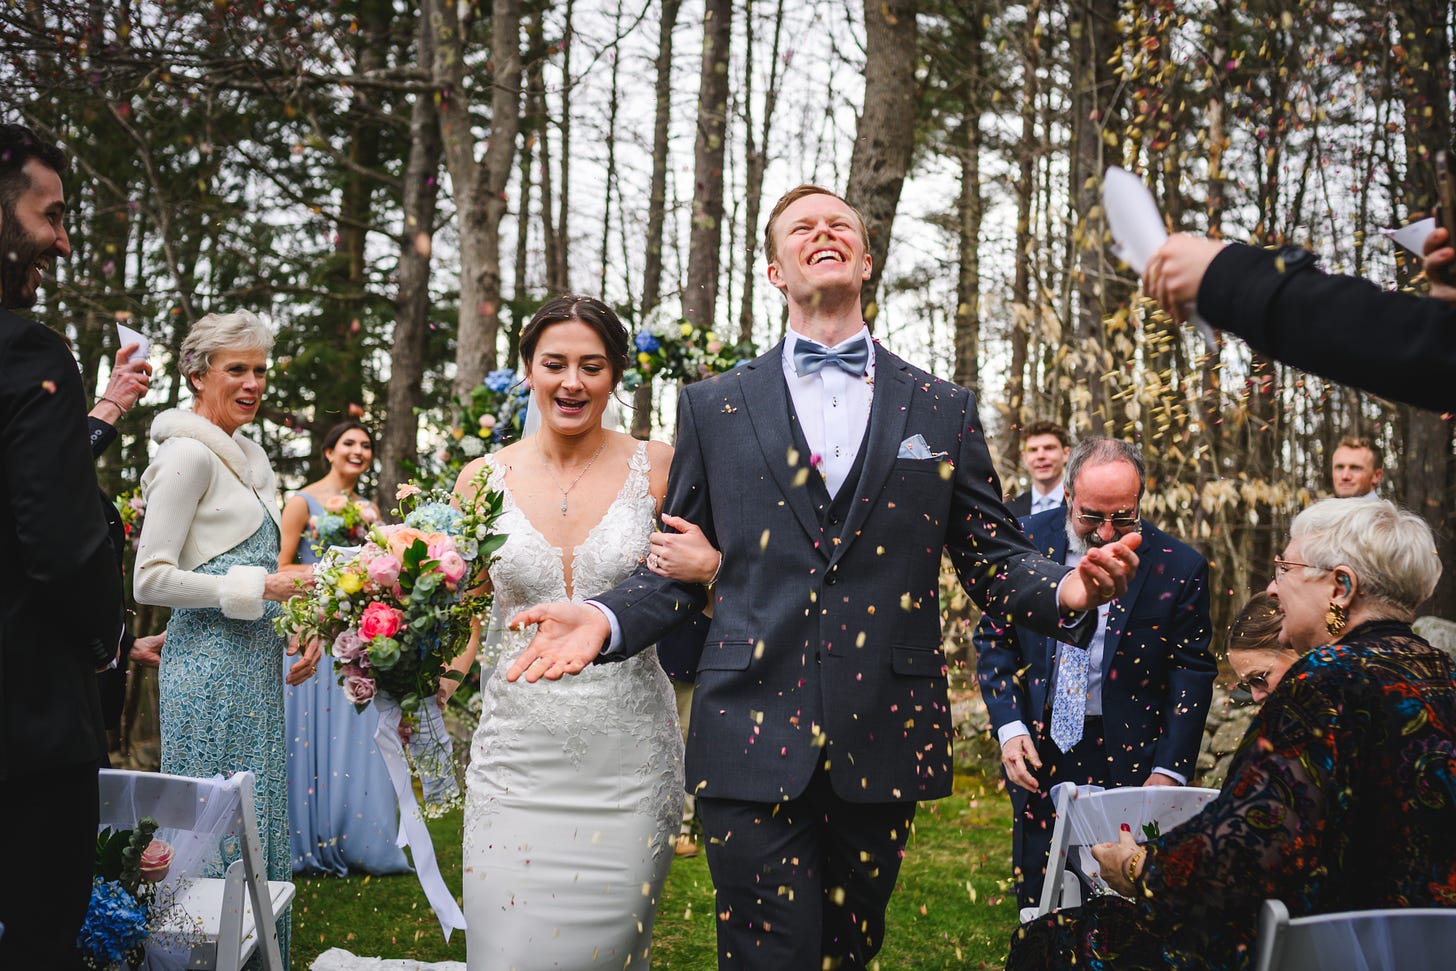 A bride and groom's recessional as guests throw dried flowers at them